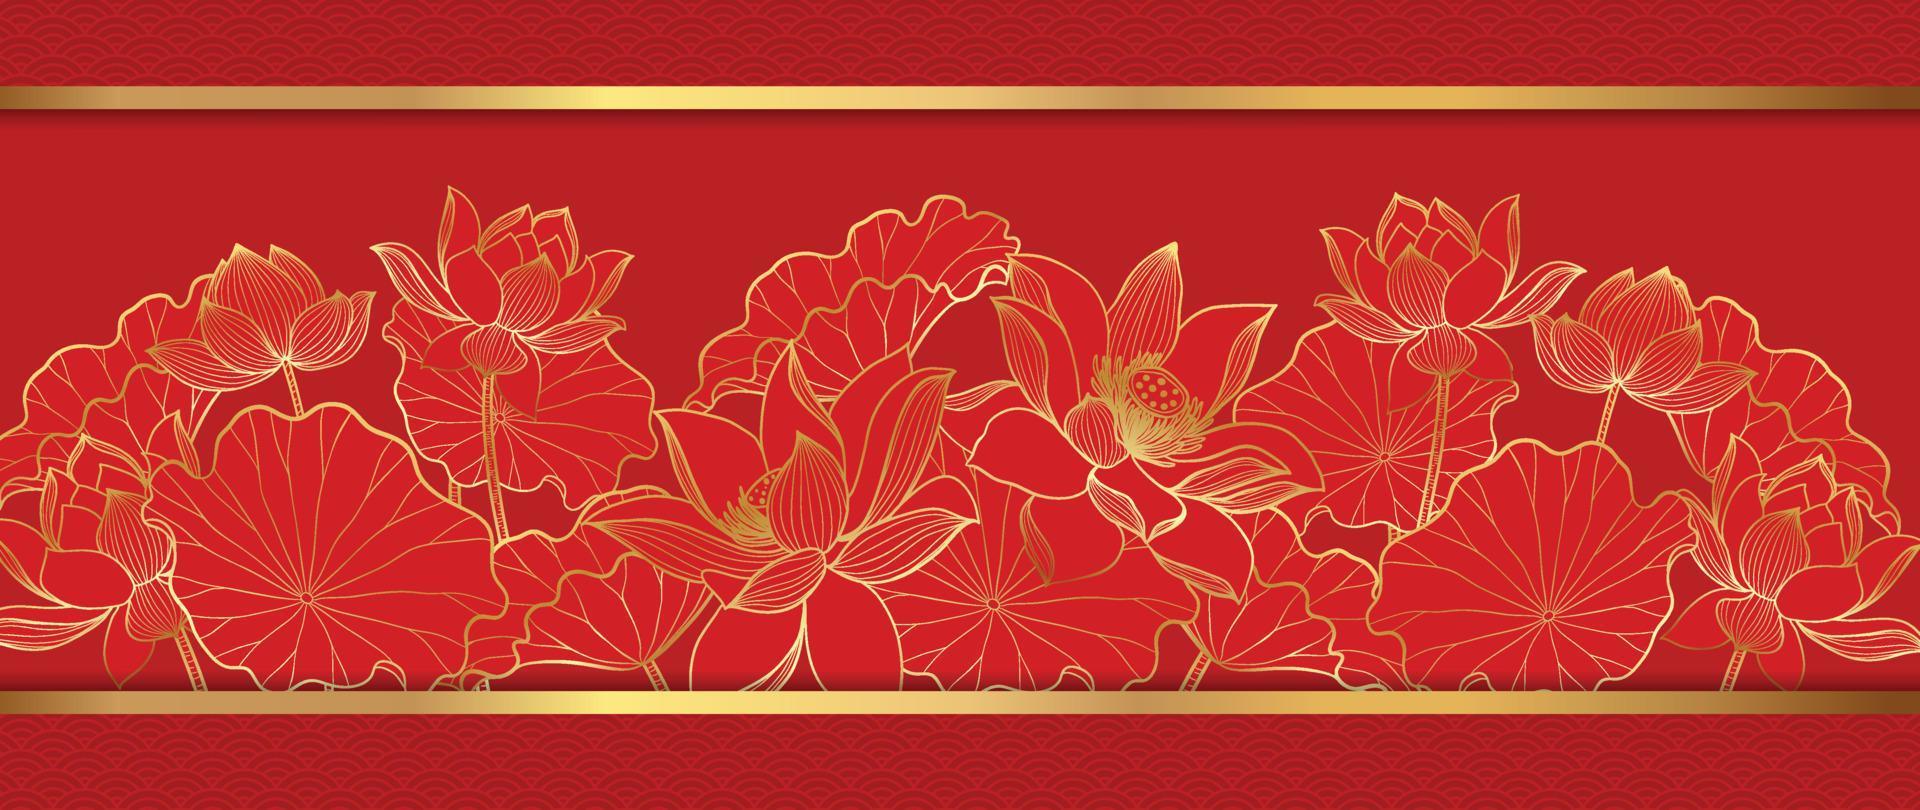 Happy Chinese new year luxury style pattern background vector. Lotus flower golden line art in gold frame on red background. Design illustration for wallpaper, card, poster, packaging, advertising. vector